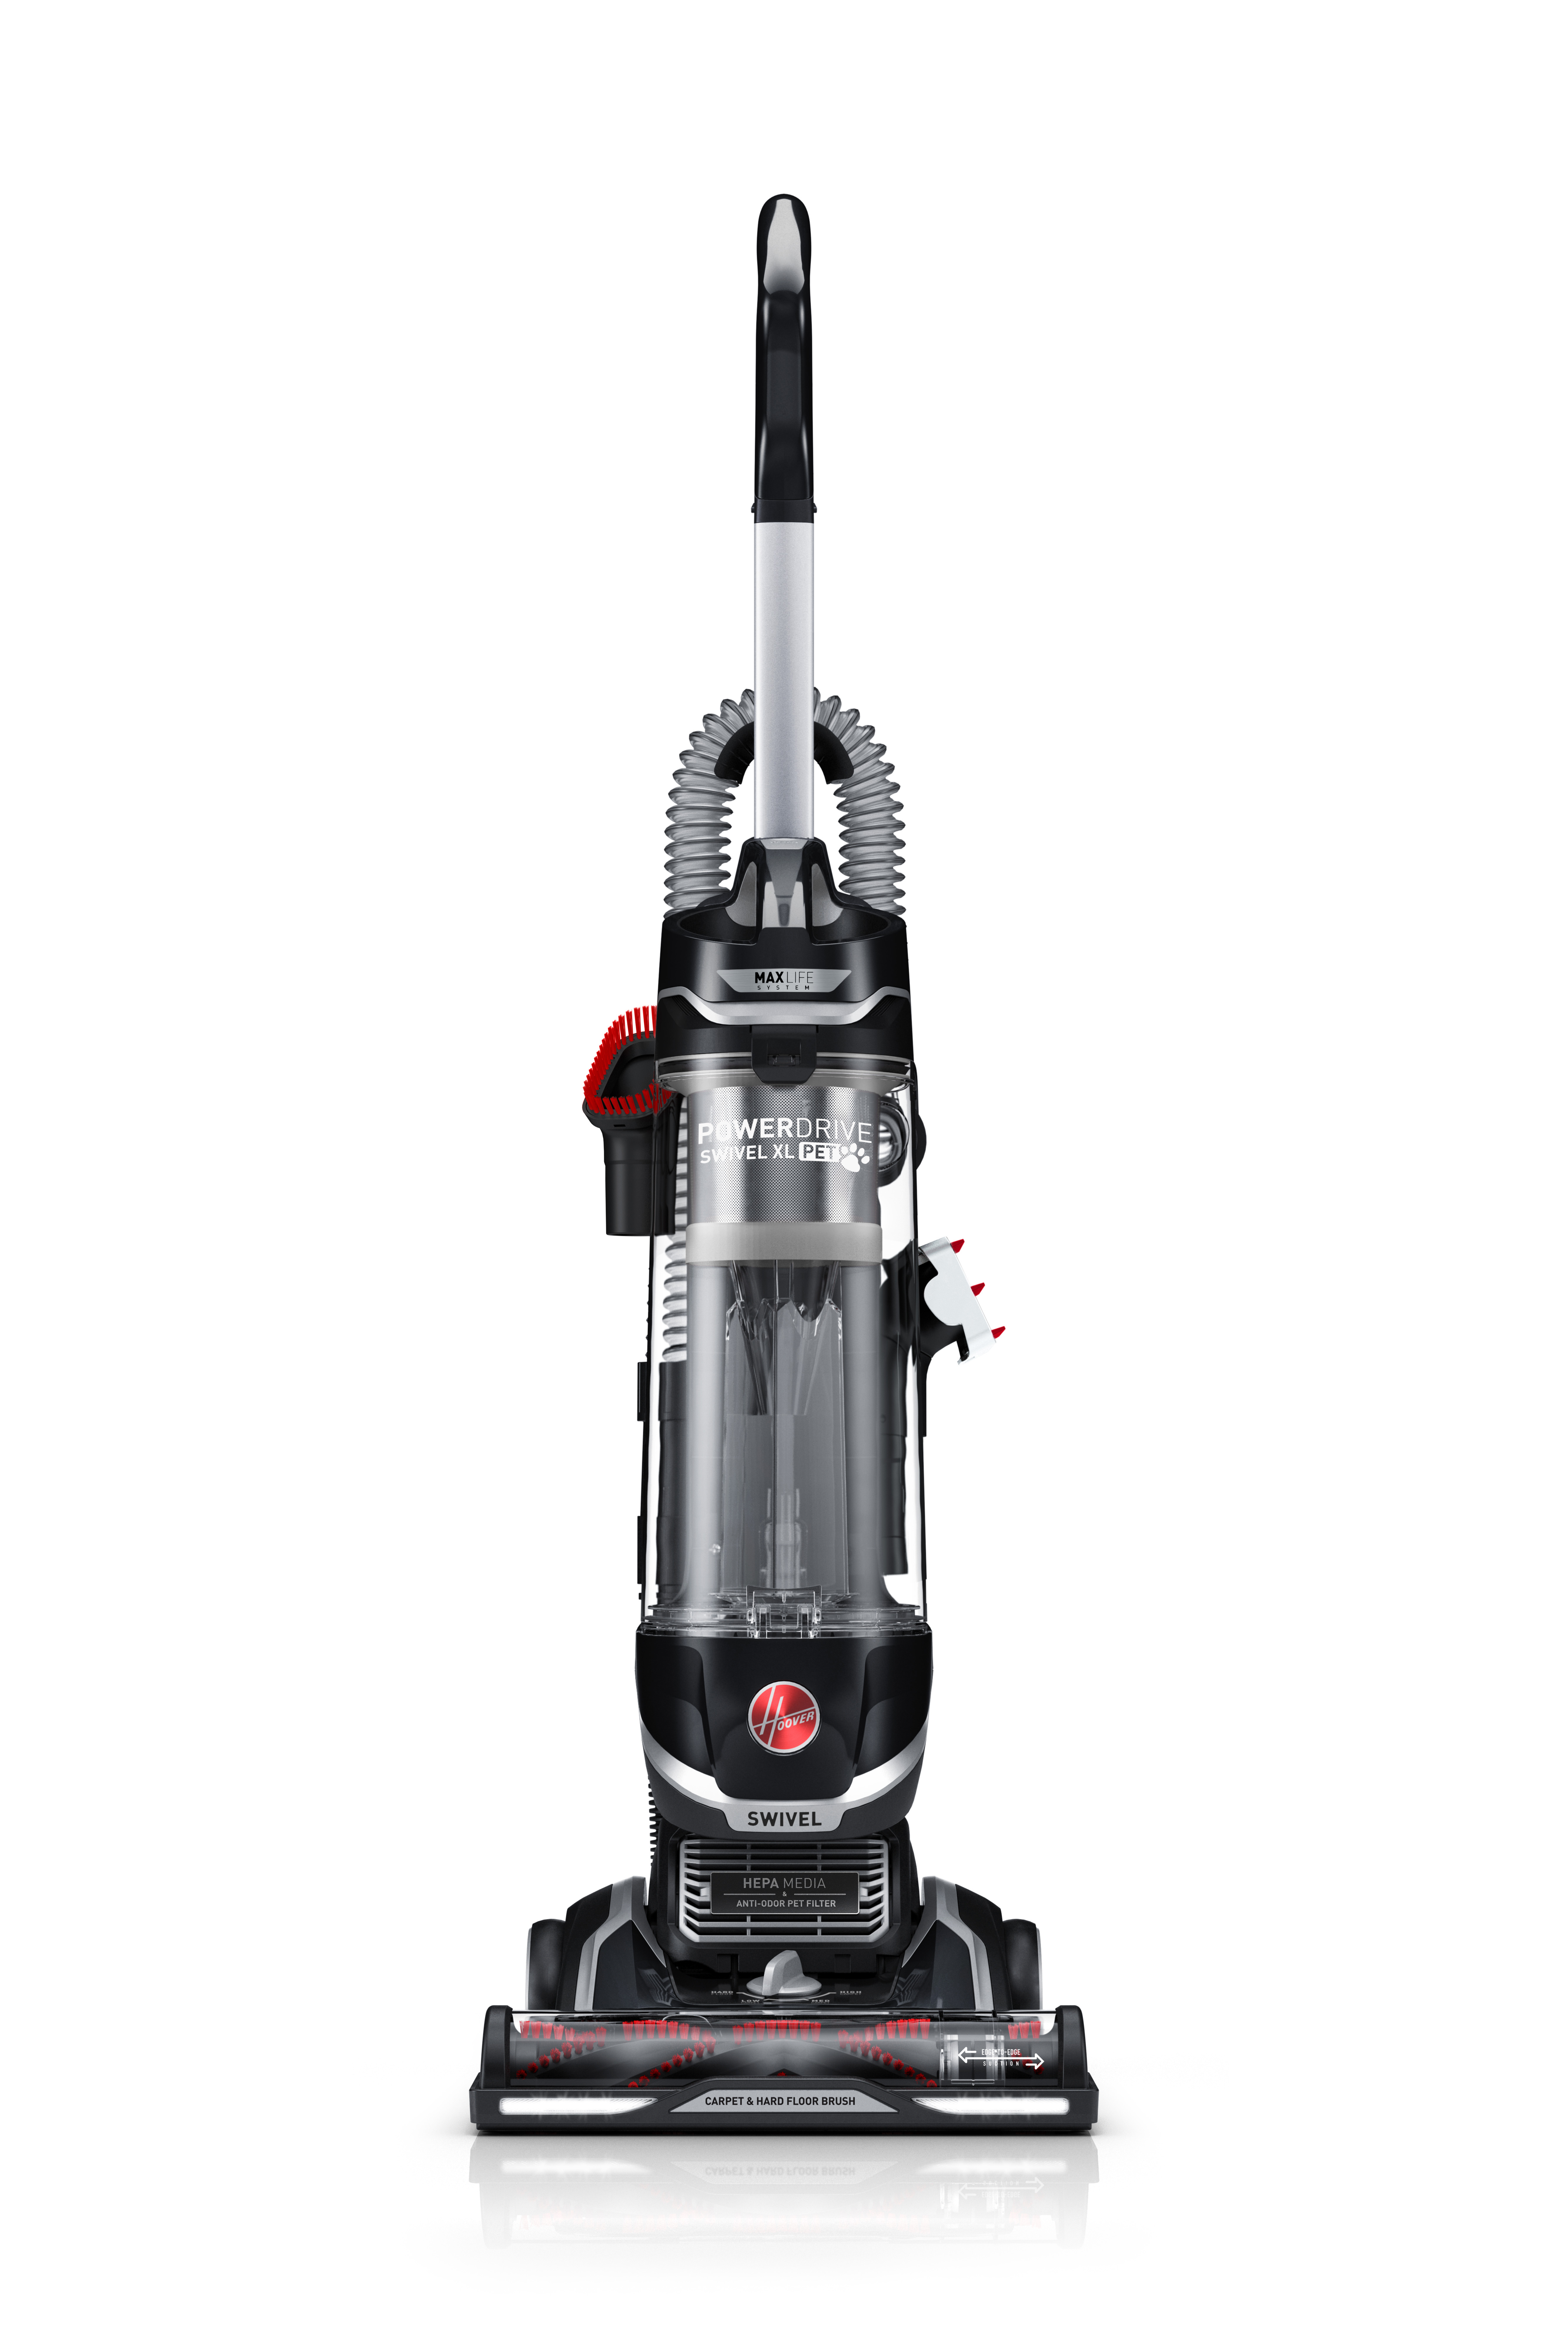 Hoover MAXLife Power Drive Swivel XL Pet Bagless Upright Vacuum Cleaner with HEPA Media Filtration, UH75210, New - image 1 of 9